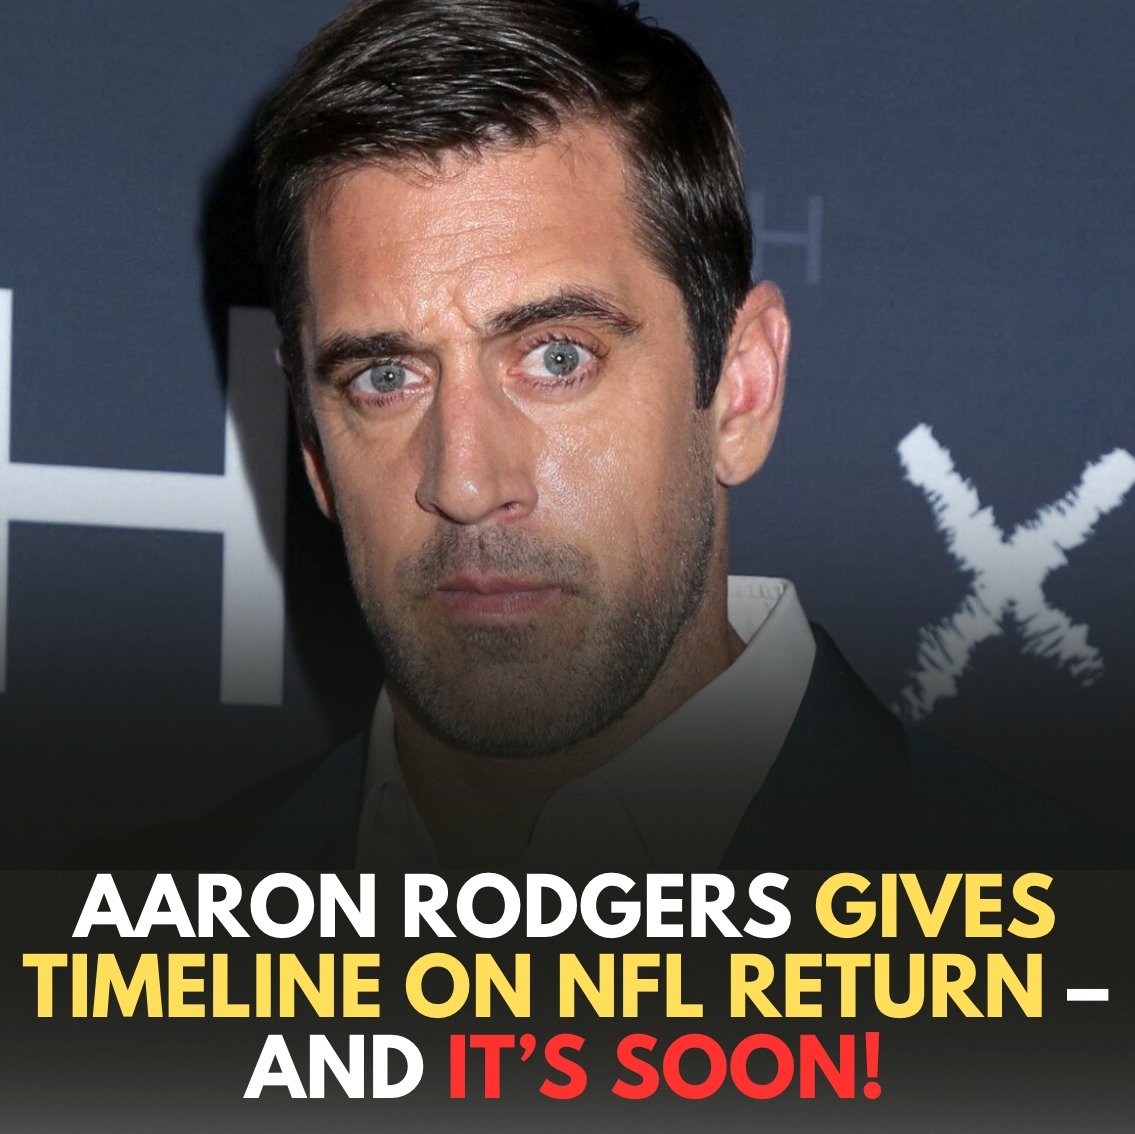 Just weeks after #AaronRodgers had surgery to repair his Achilles, the New York #Jets quarterback plans to be back playing for the team “in a few weeks.”⁠ ⁠ theblast.com/553047/aaron-r… ⁠ ⁠